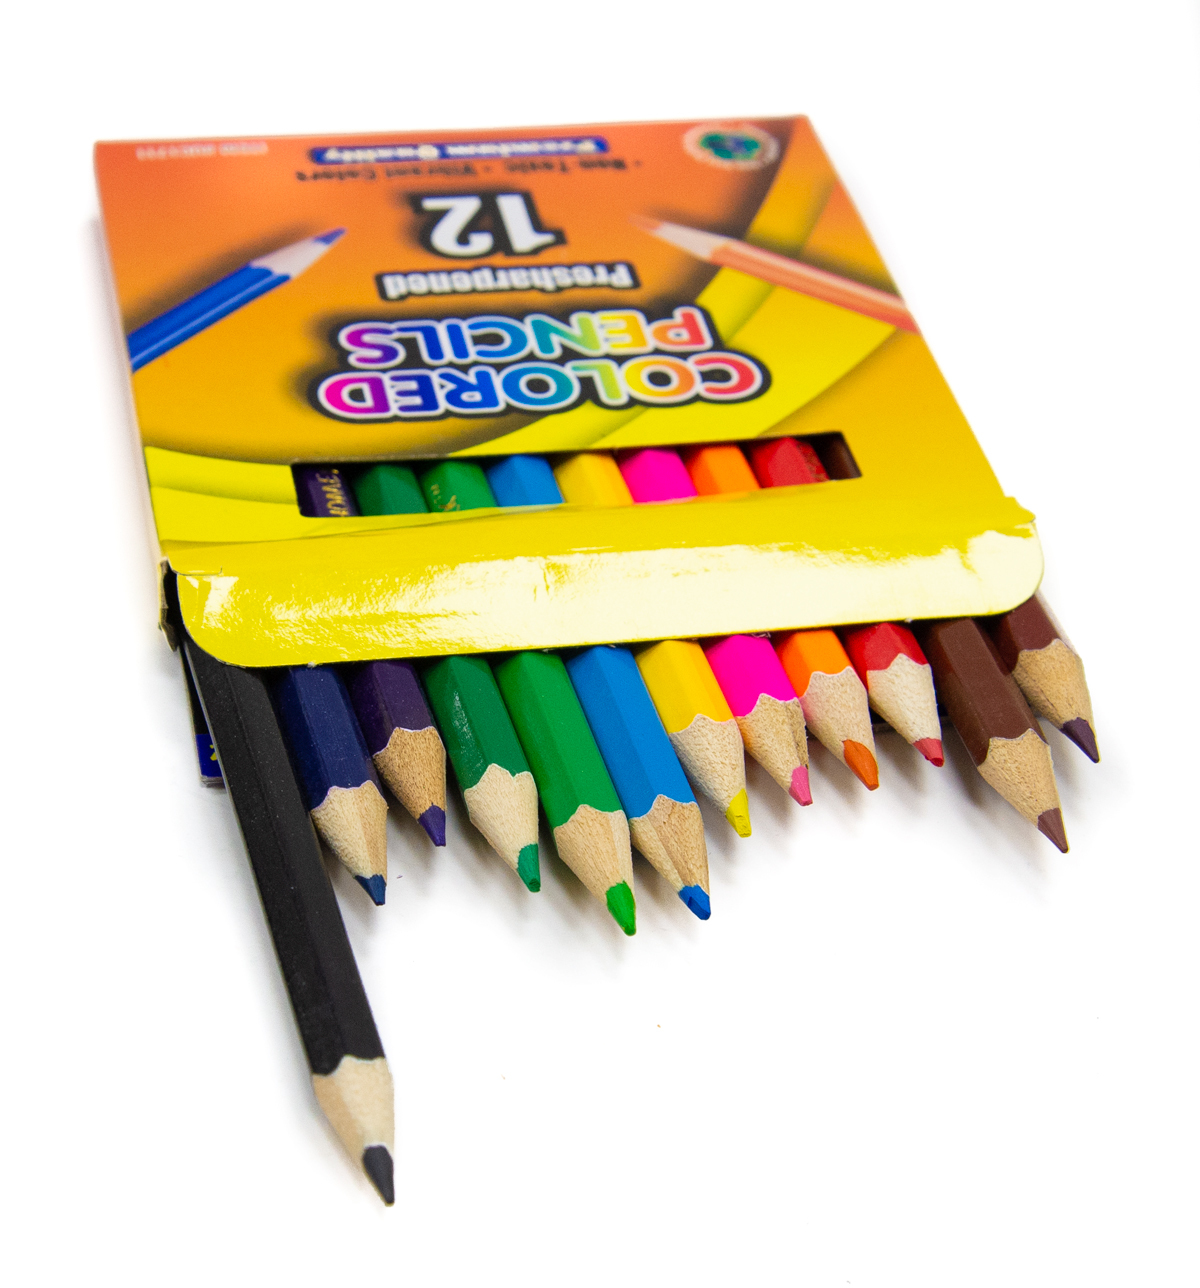 Wholesale Colored Pencils - 24 Pack, Pre-Sharpened - DollarDays